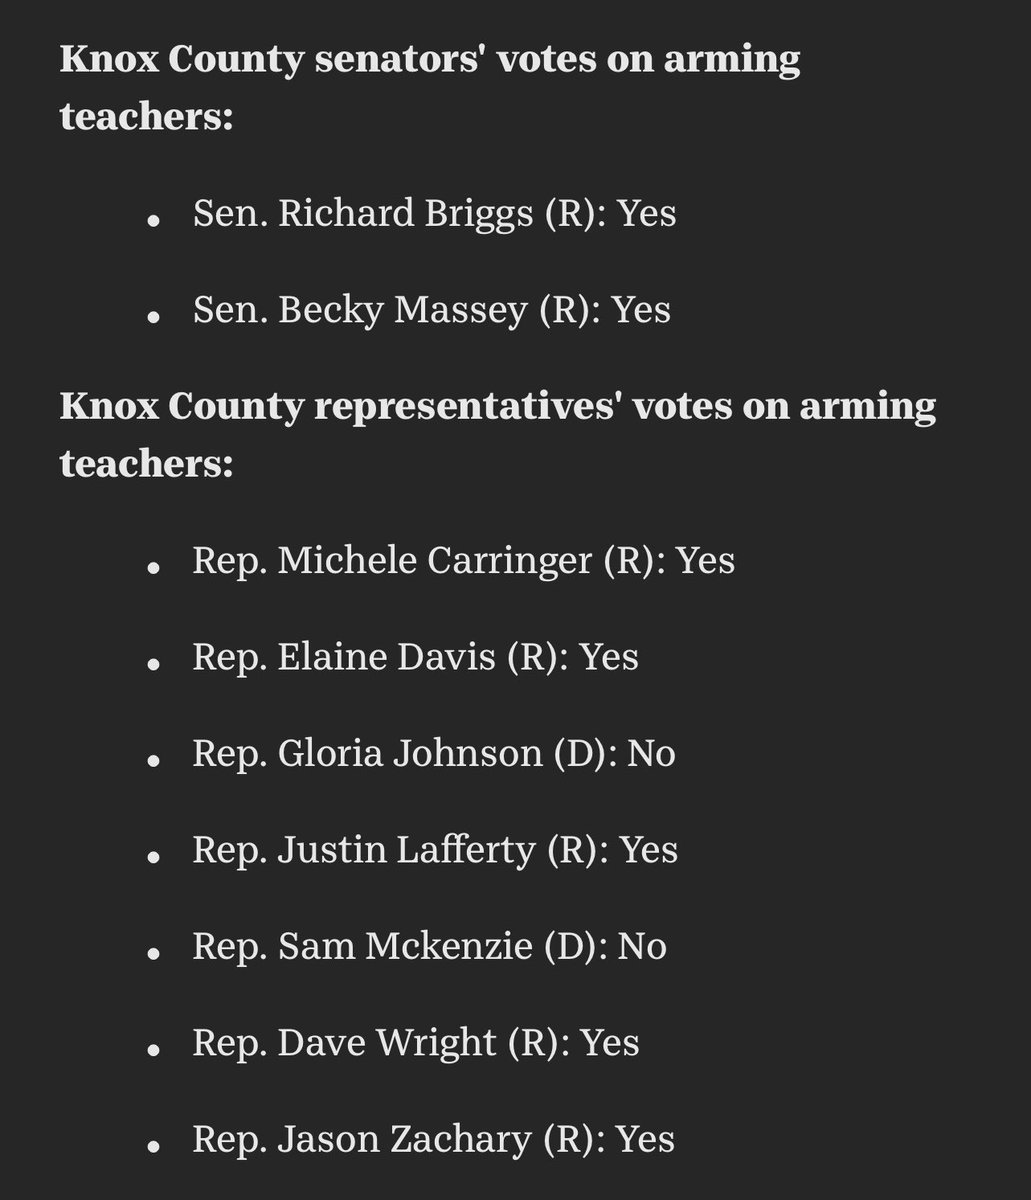 💥Hey Tennesseans who live in Knox County:
Remember these senators and representatives who voted yes to arm teachers in your schools. 
💥We can make a difference at the ballot box so vote them out. Protect your child. 
#BloodOnTheirHands  
#VoteBlueTN #VoteBlueDownBallot